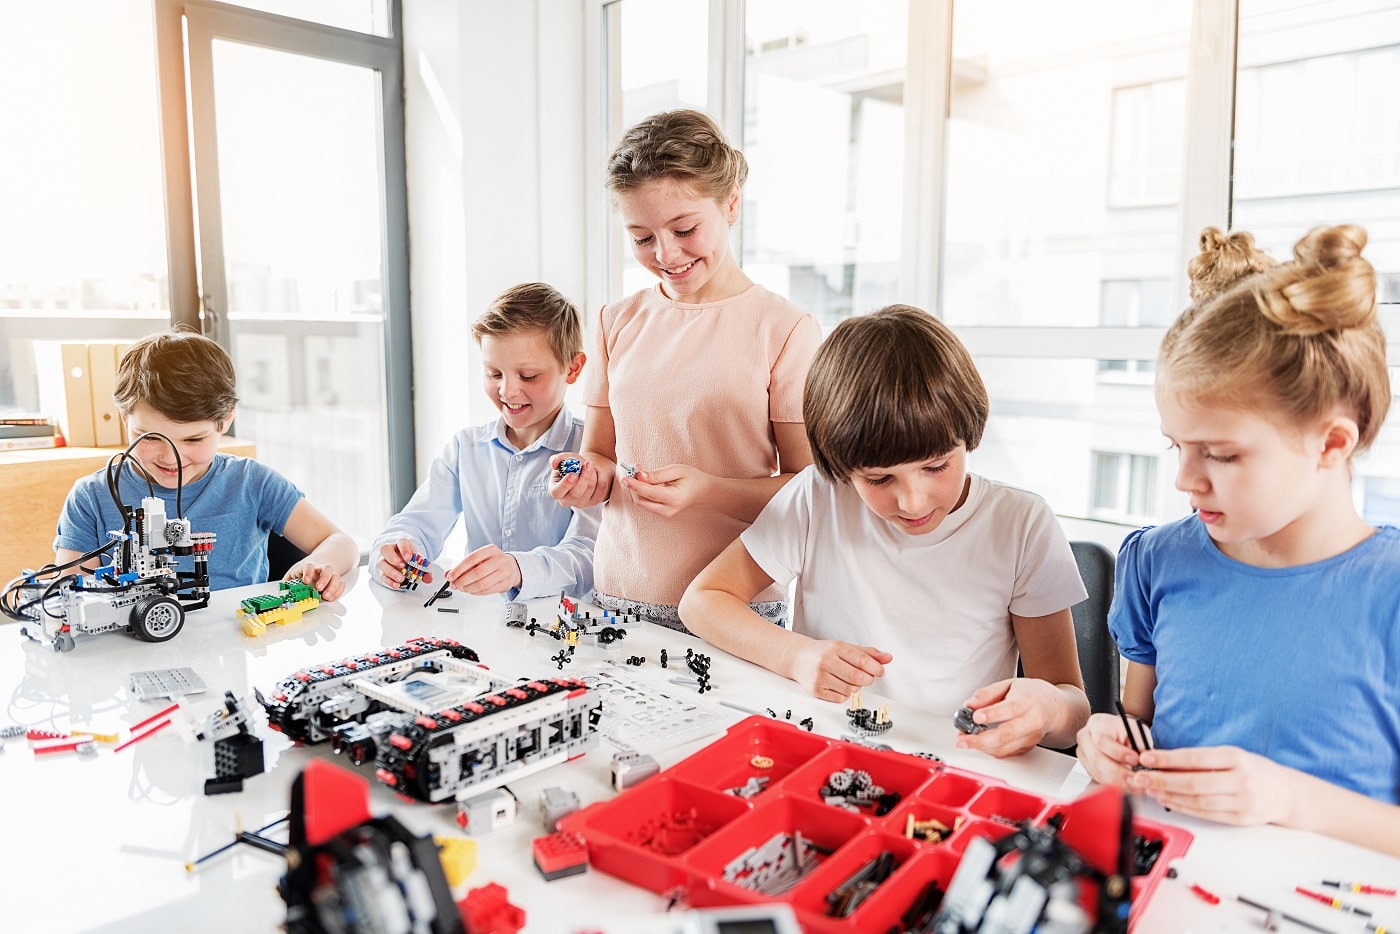 kids use lego in class